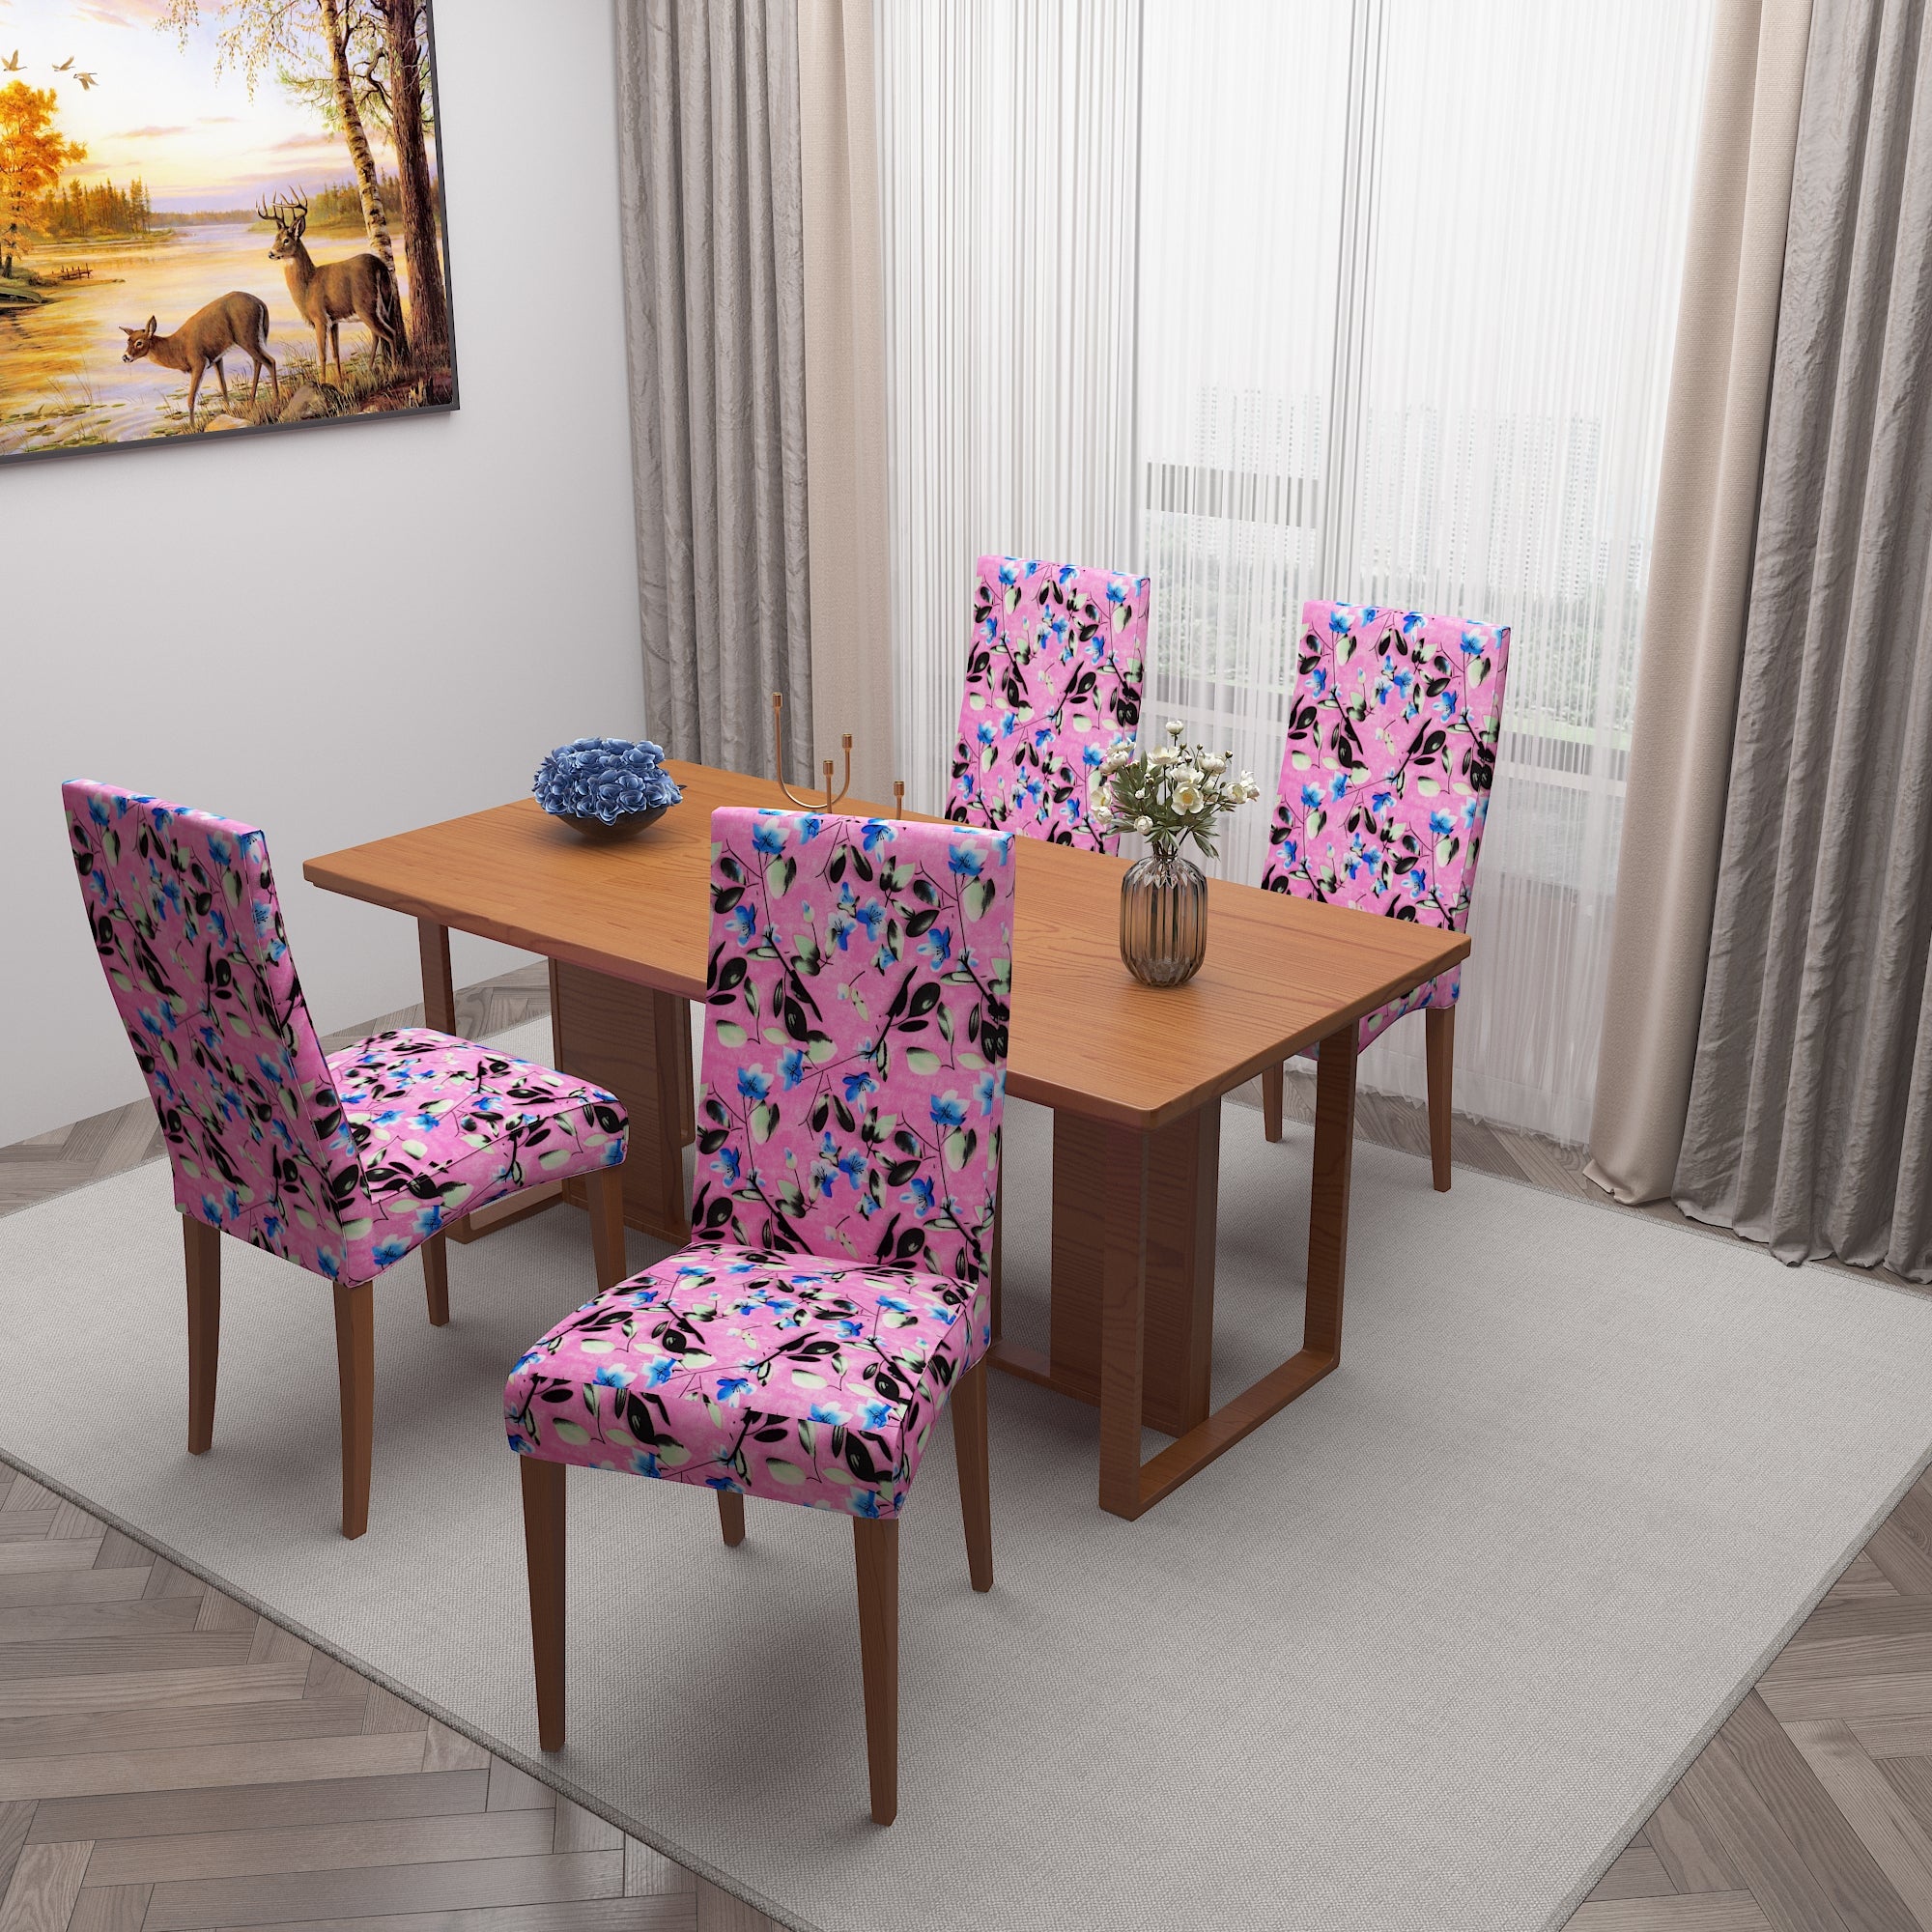 Polyester Spandex Stretchable Printed Chair Cover, MG12